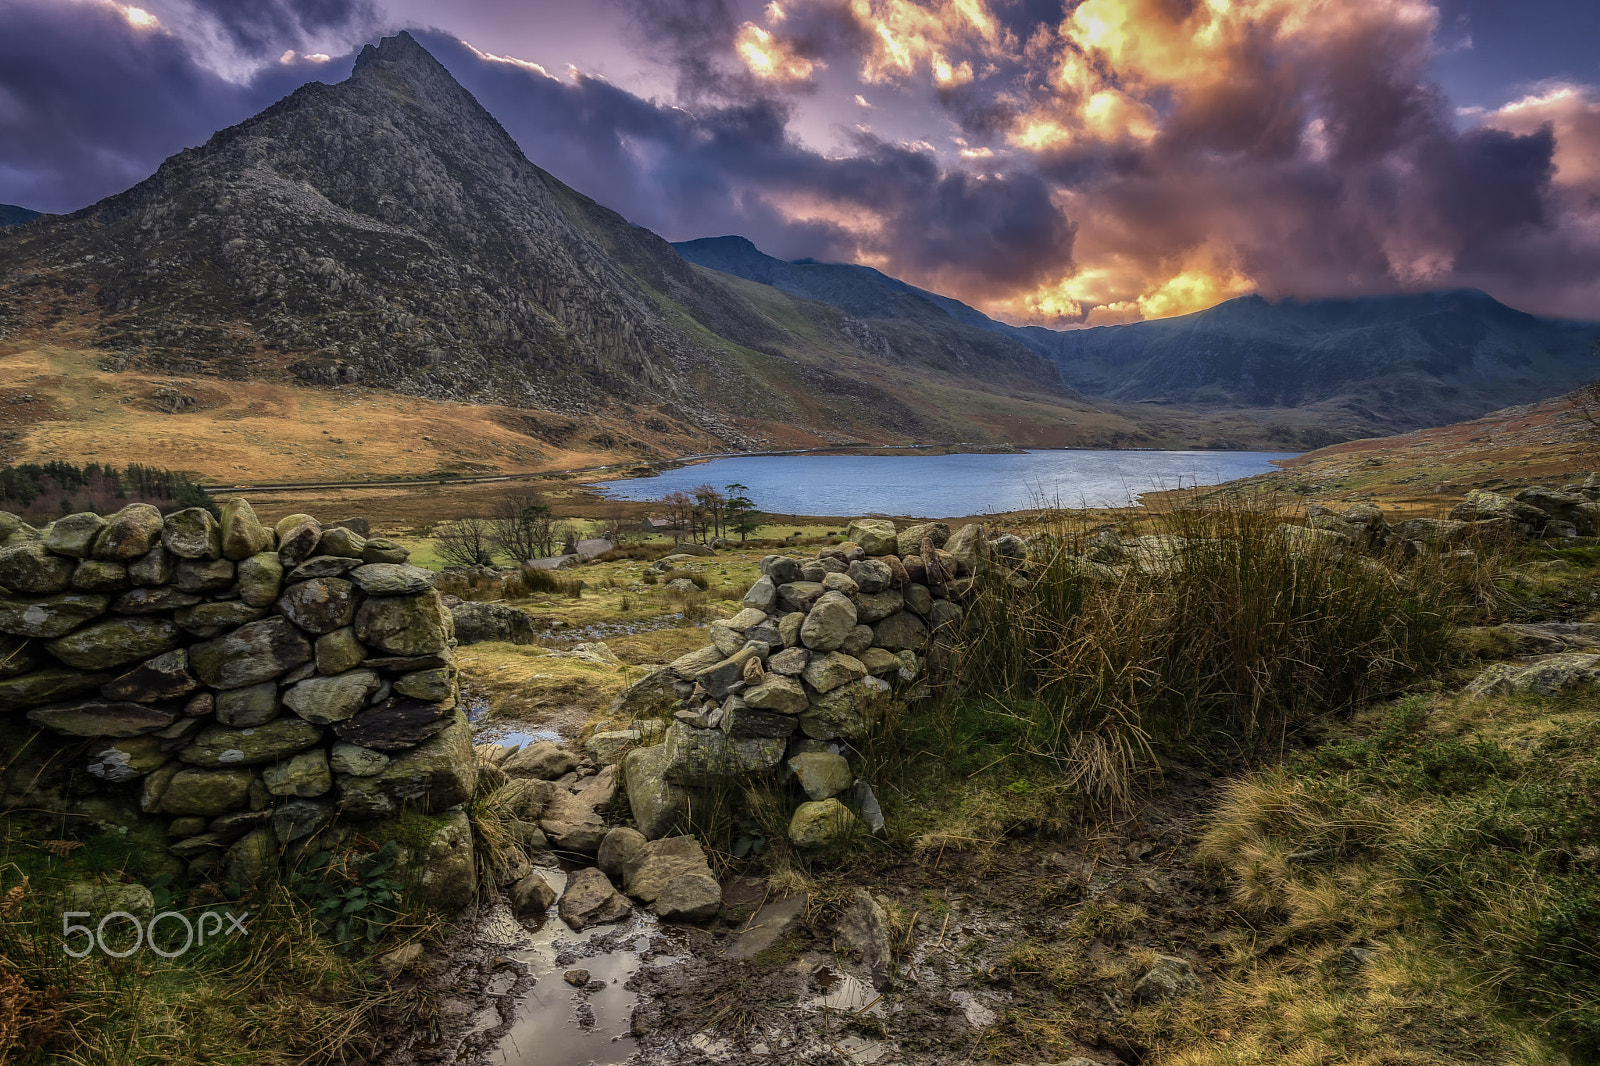 ZEISS Touit 12mm F2.8 sample photo. Ogwen valley snowdonia photography